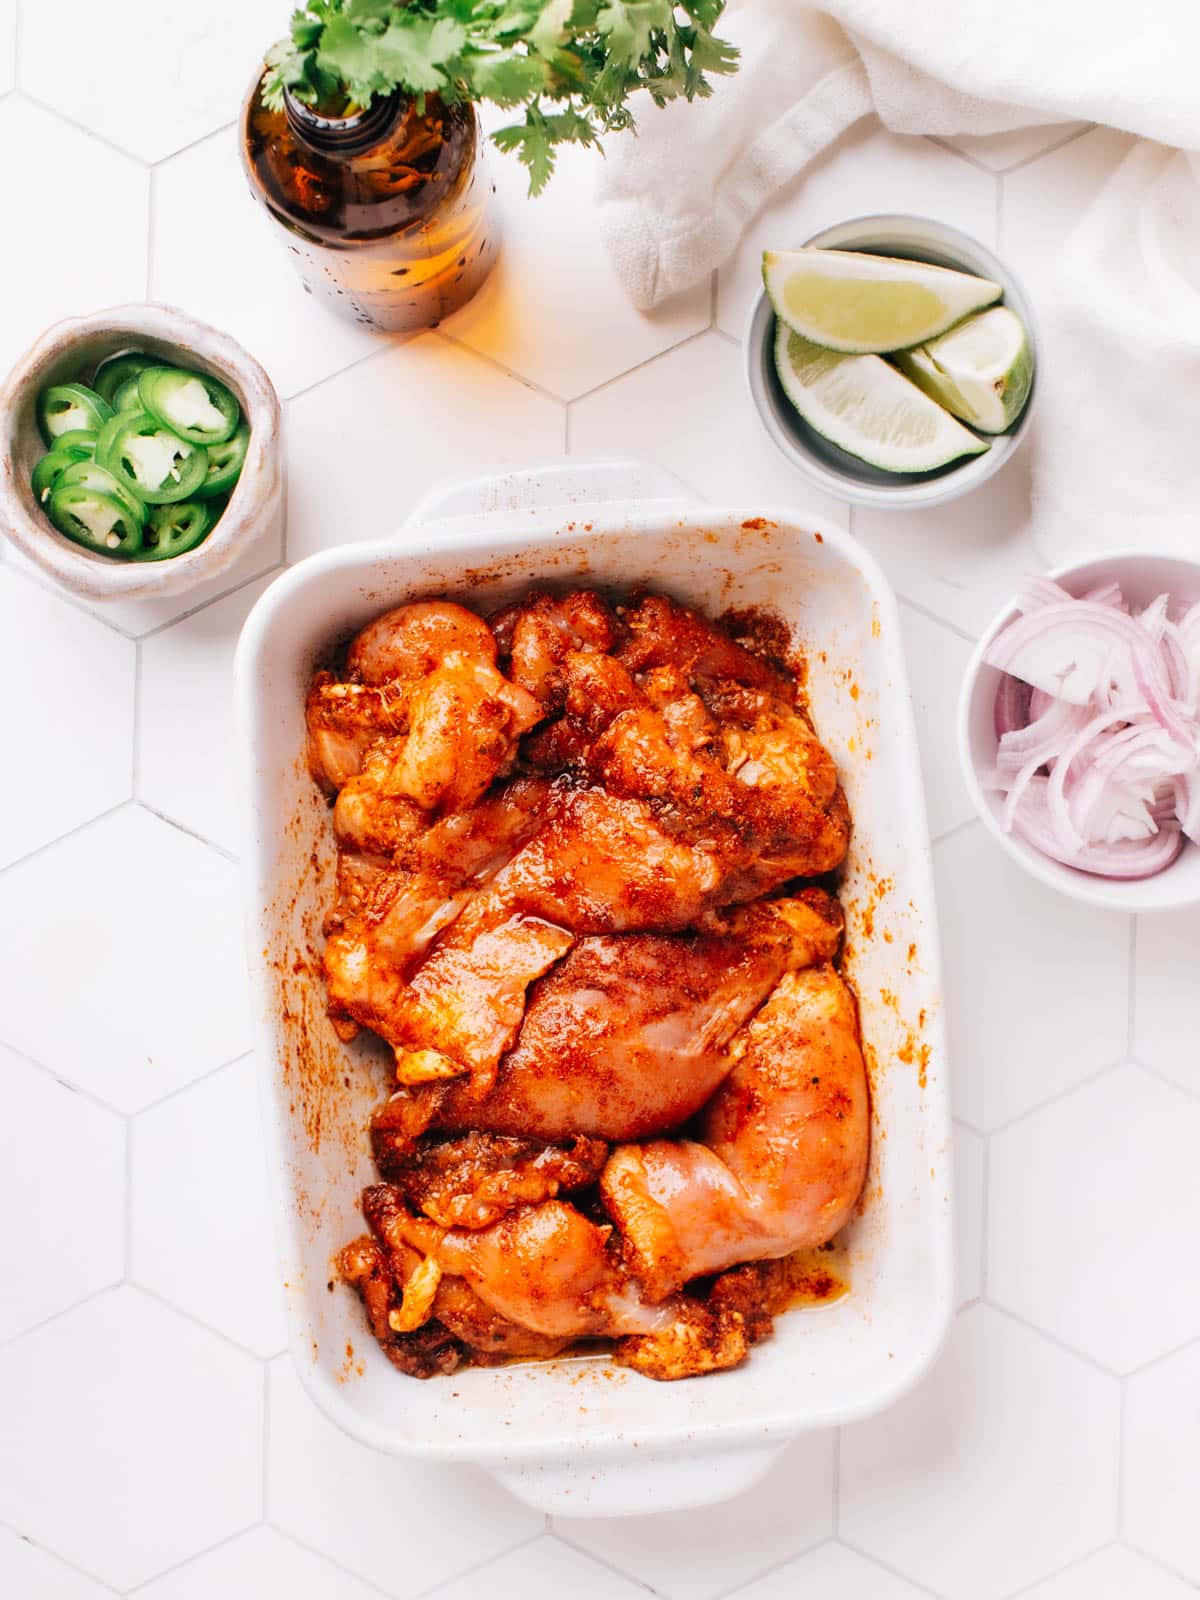 The marinated chicken thighs are left to rest at room temperature for 30 minutes. There are individual bowls of sliced jalapenos, onions, and limes beside the chicken bowl.